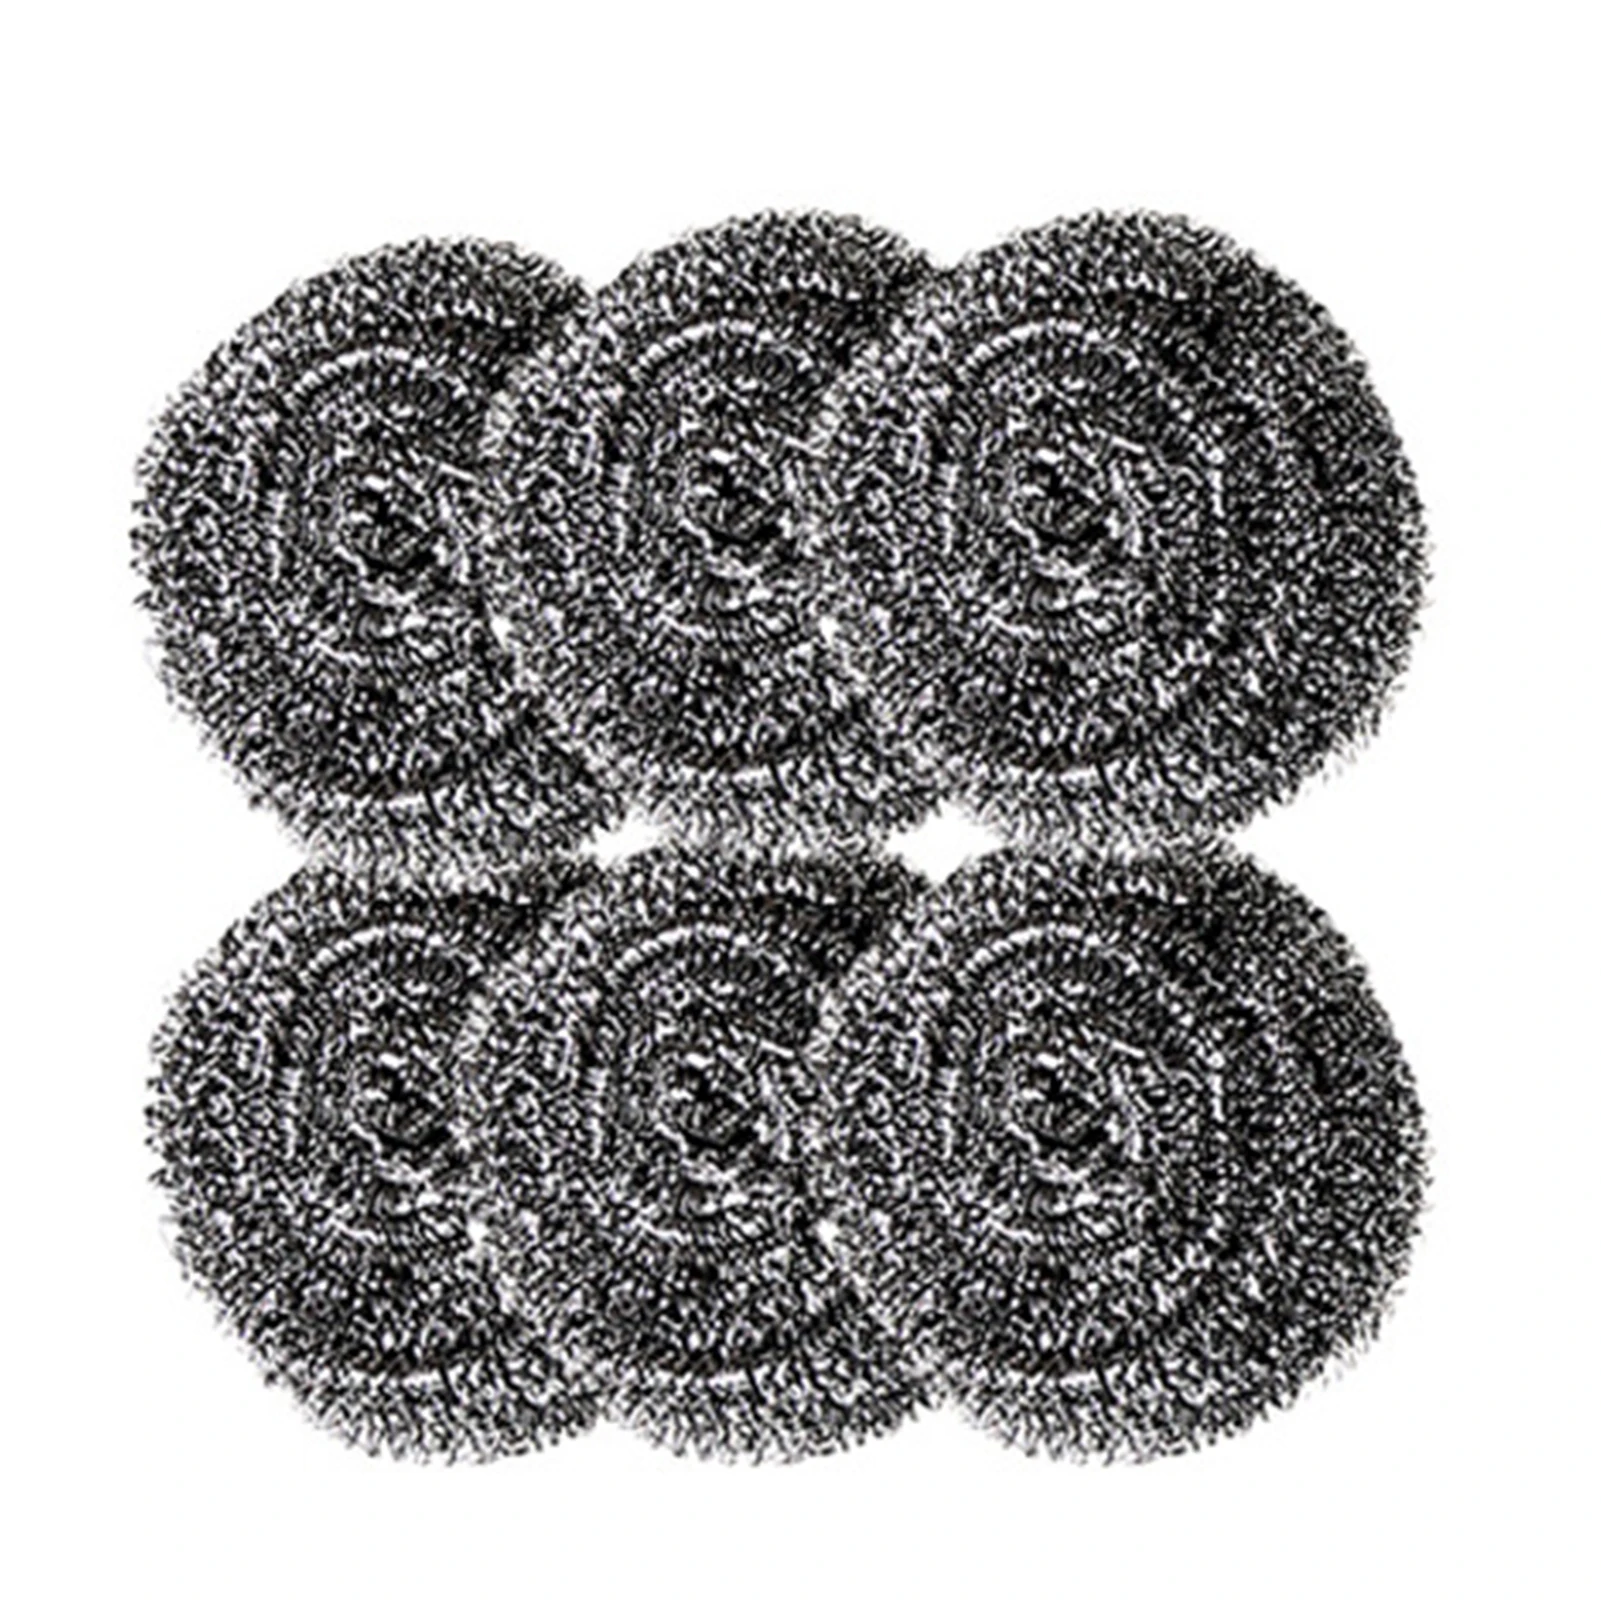 

6pcs Stainless Steel Sponges Scrubbers Scrubbing Scouring Pad Steel Wool Scrubber for Kitchens Bathroom and More